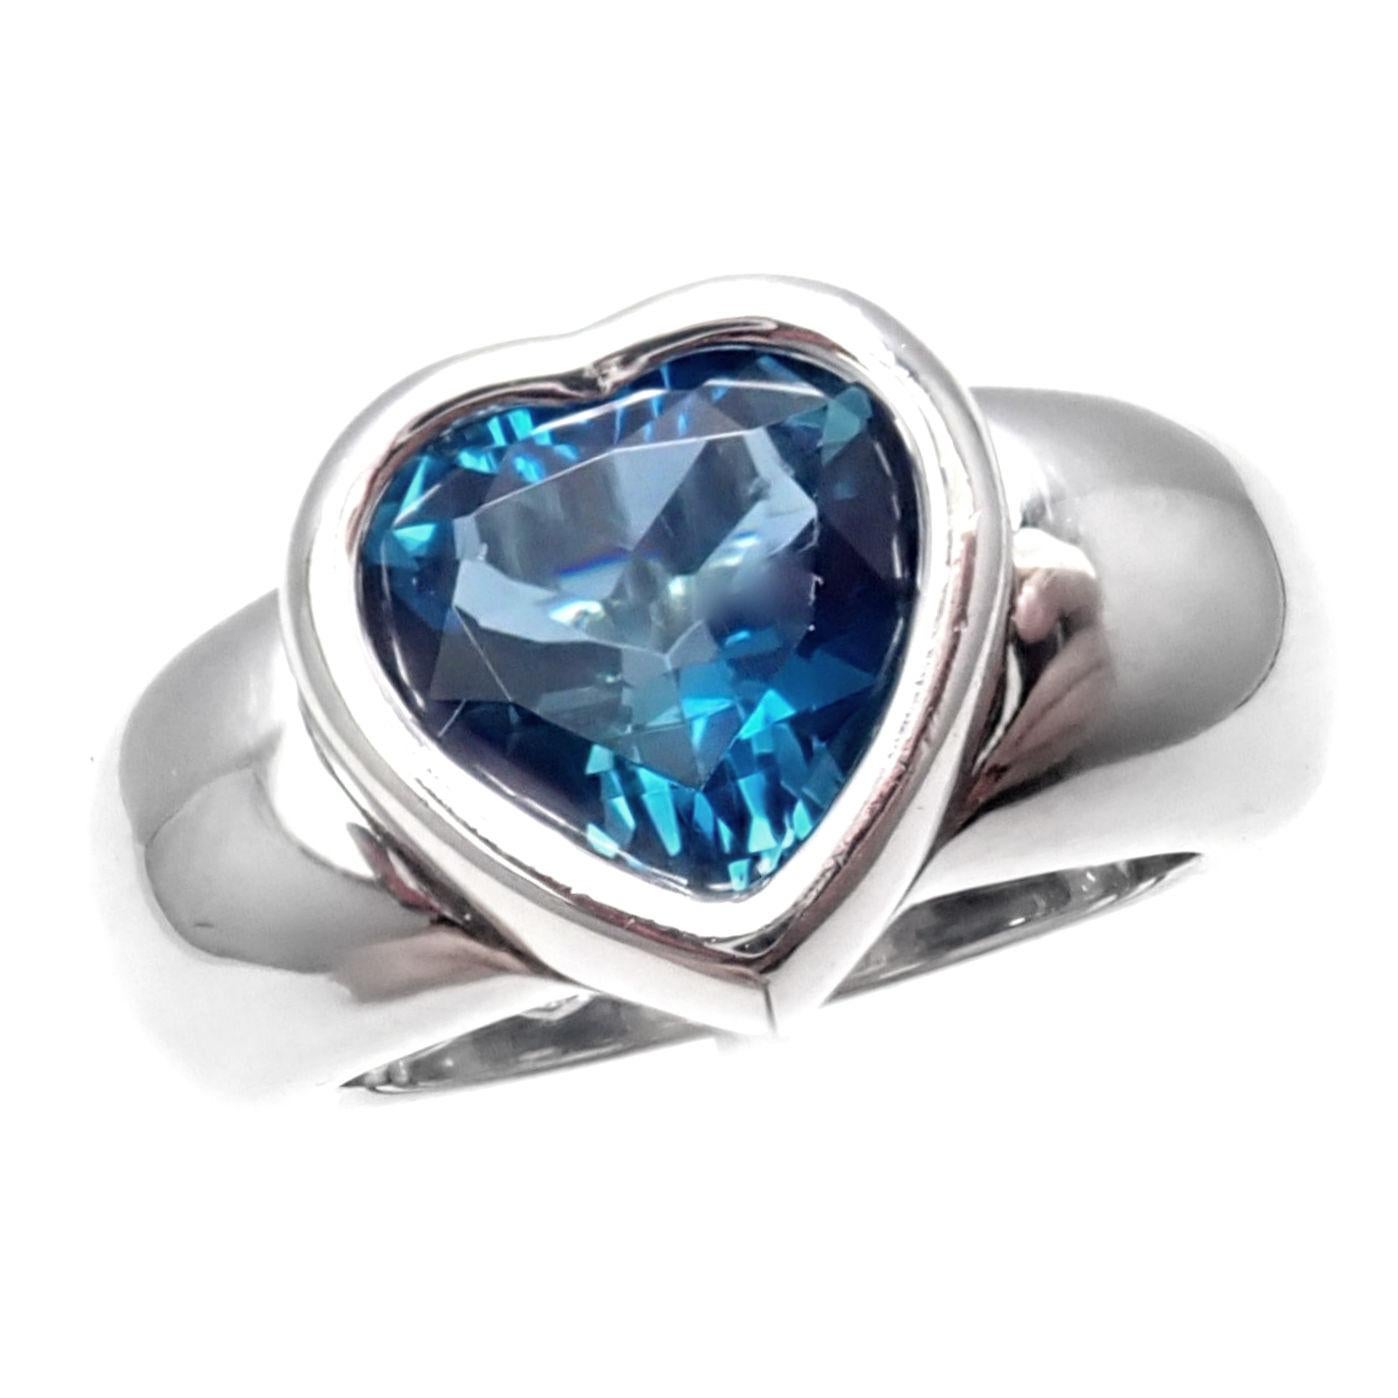 18k Yellow Gold London Blue Topaz Heart Ring by Piaget. 
With 1 heart shape London Blue Topaz 10mm x 9.5mm
Details: 
Size: US 7.25 EU 55
Weight: 14.7 grams
Stamped Hallmarks: 750 Piaget A55947 55
*Free Shipping within the United States*
Your Price: